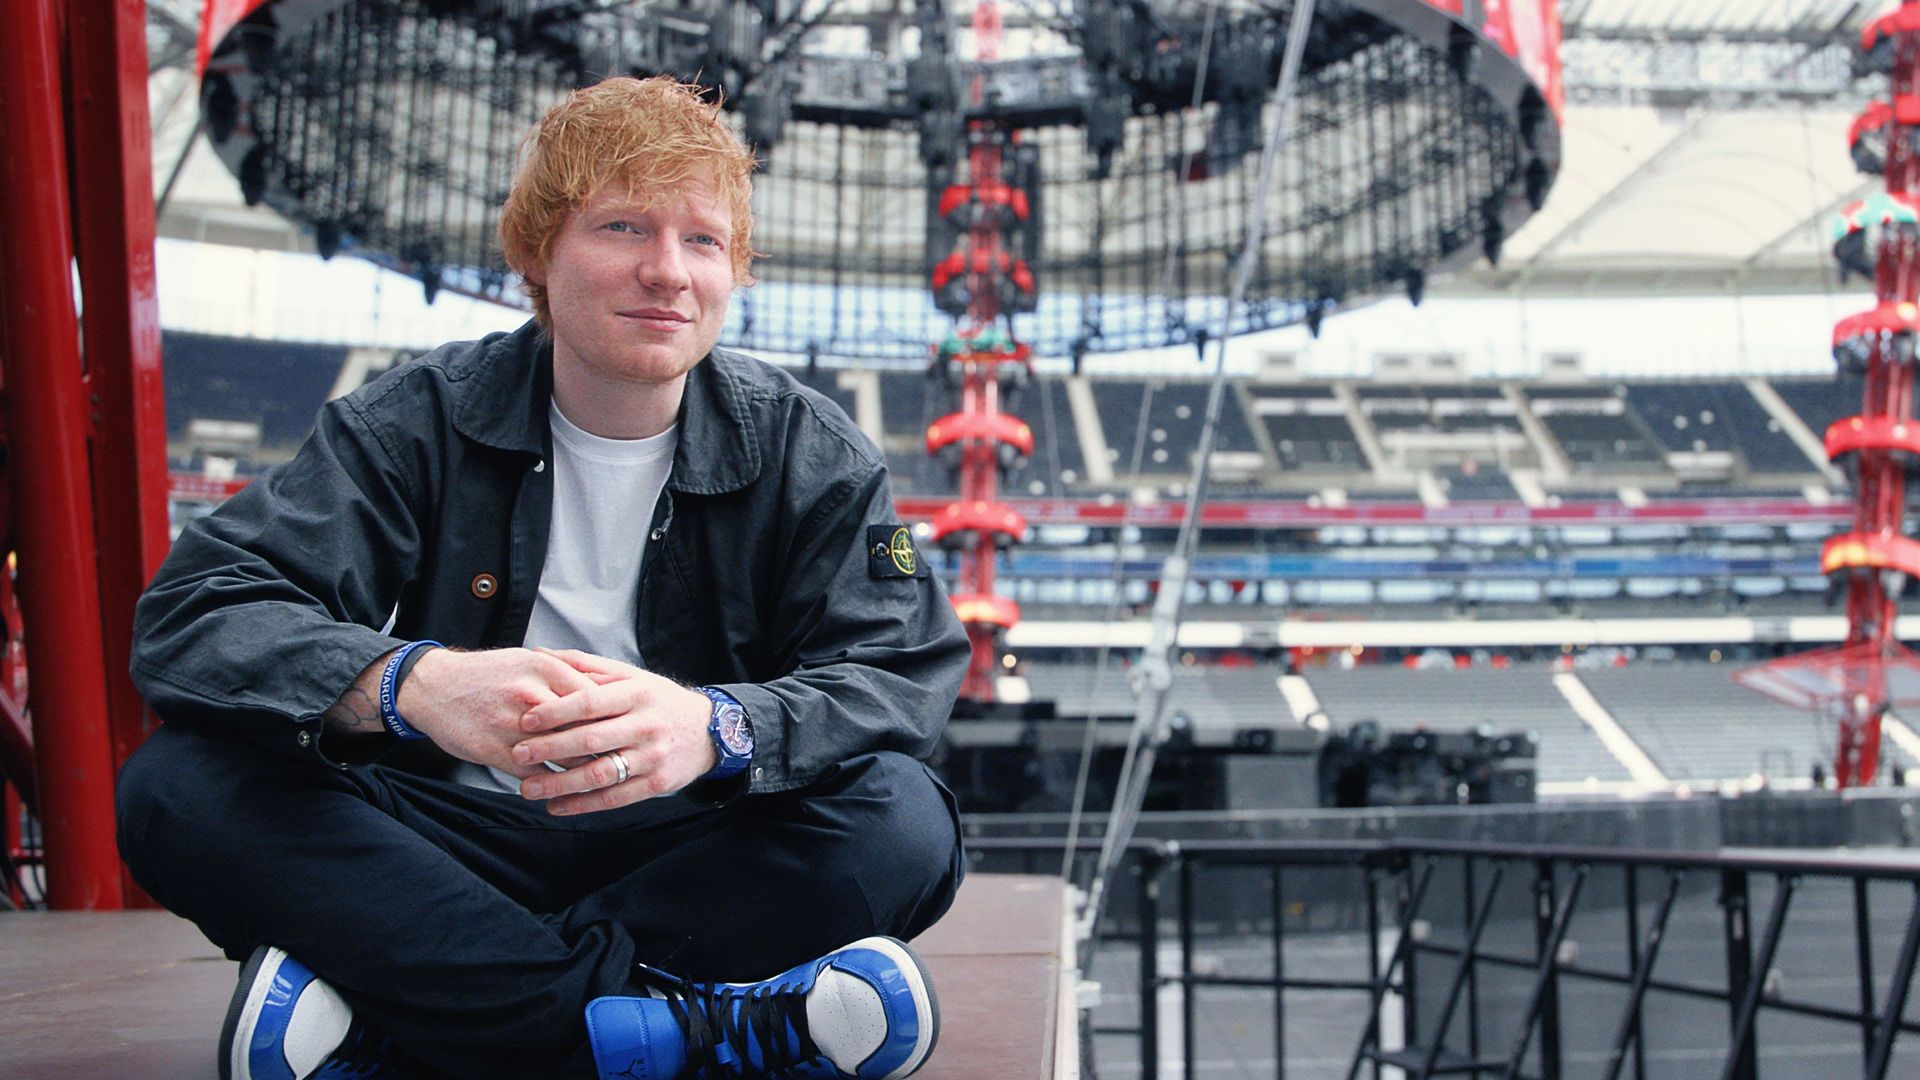 Ed Sheeran: The Sum of It All background